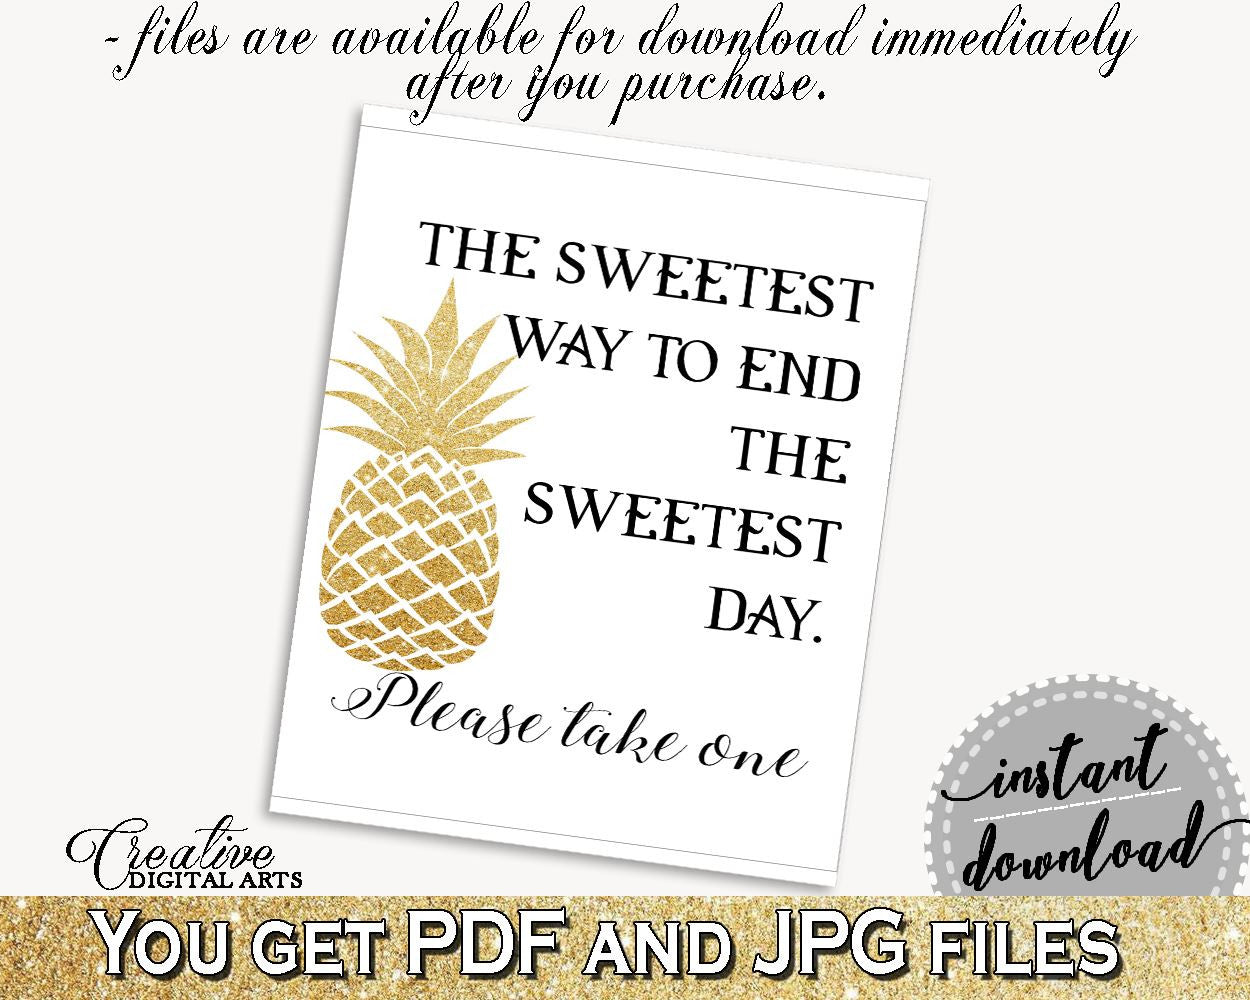 The Sweetest Way To End The Sweets Day Bridal Shower The Sweetest Way To End The Sweets Day Pineapple Bridal Shower The Sweetest Way 86GZU - Digital Product